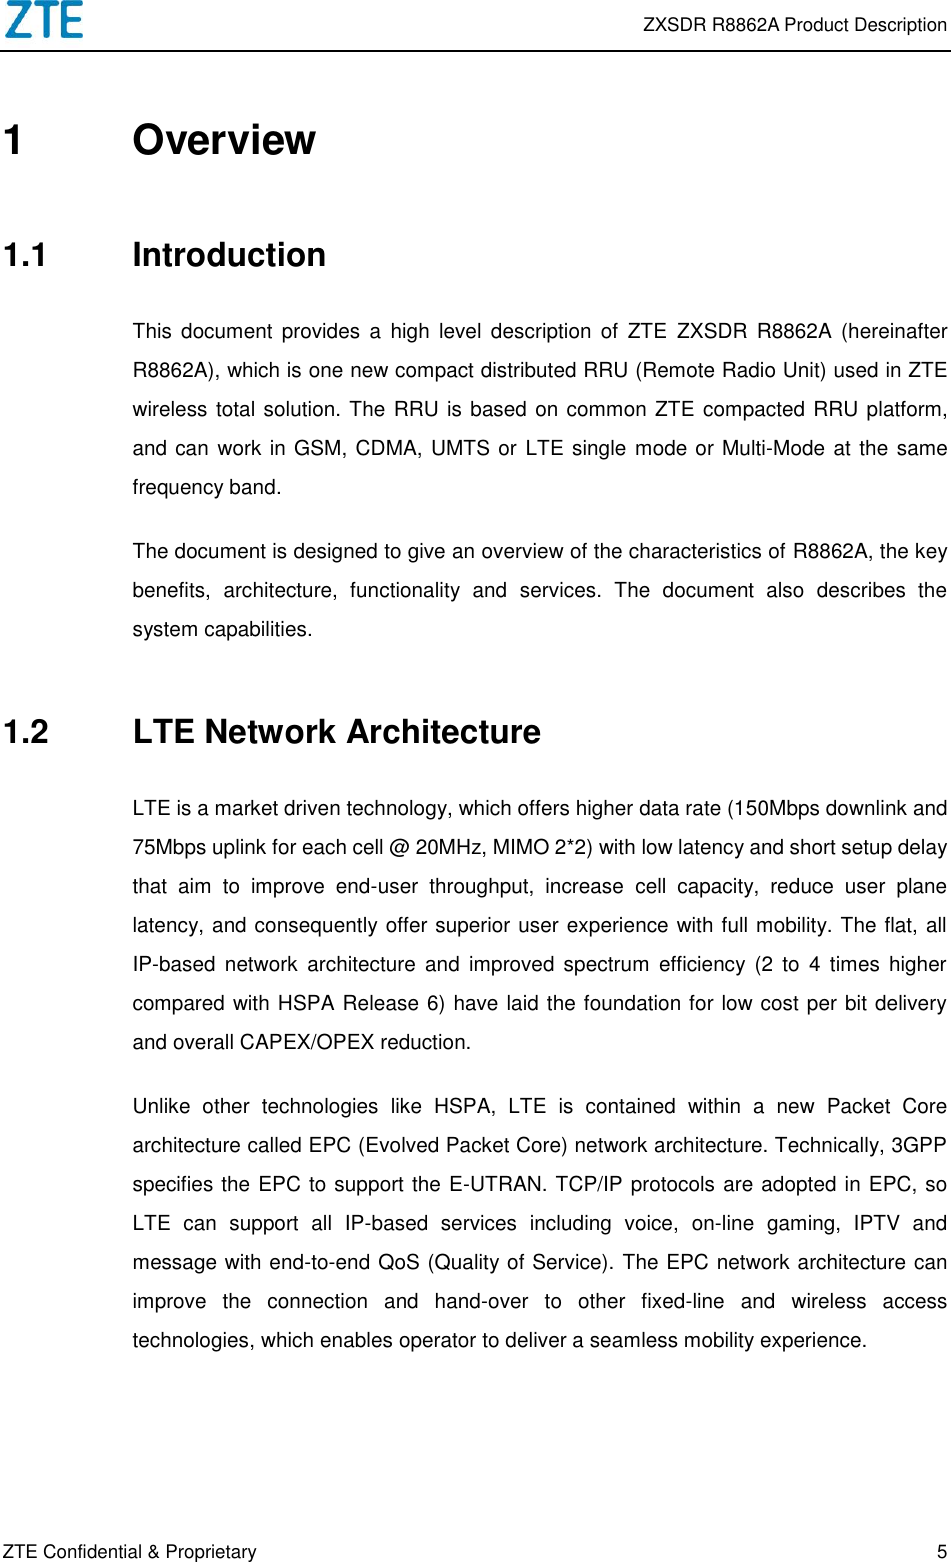  ZXSDR R8862A Product Description ZTE Confidential &amp; Proprietary 5 1  Overview 1.1  Introduction This  document  provides  a  high  level  description  of  ZTE  ZXSDR  R8862A  (hereinafter R8862A), which is one new compact distributed RRU (Remote Radio Unit) used in ZTE wireless total solution. The RRU is based on common ZTE compacted RRU platform, and can work in GSM, CDMA, UMTS or  LTE single mode or Multi-Mode at the same frequency band.   The document is designed to give an overview of the characteristics of R8862A, the key benefits,  architecture,  functionality  and  services.  The  document  also  describes  the system capabilities. 1.2  LTE Network Architecture LTE is a market driven technology, which offers higher data rate (150Mbps downlink and 75Mbps uplink for each cell @ 20MHz, MIMO 2*2) with low latency and short setup delay that  aim  to  improve  end-user  throughput,  increase  cell  capacity,  reduce  user  plane latency, and consequently offer superior user experience with full mobility. The flat, all IP-based  network  architecture  and  improved  spectrum  efficiency  (2  to  4  times  higher compared with HSPA Release 6) have laid the foundation for low cost per bit delivery and overall CAPEX/OPEX reduction.   Unlike  other  technologies  like  HSPA,  LTE  is  contained  within  a  new  Packet  Core architecture called EPC (Evolved Packet Core) network architecture. Technically, 3GPP specifies the EPC to support the E-UTRAN. TCP/IP protocols are adopted in EPC, so LTE  can  support  all  IP-based  services  including  voice,  on-line  gaming,  IPTV  and message with end-to-end QoS (Quality of Service). The EPC network architecture can improve  the  connection  and  hand-over  to  other  fixed-line  and  wireless  access technologies, which enables operator to deliver a seamless mobility experience. 